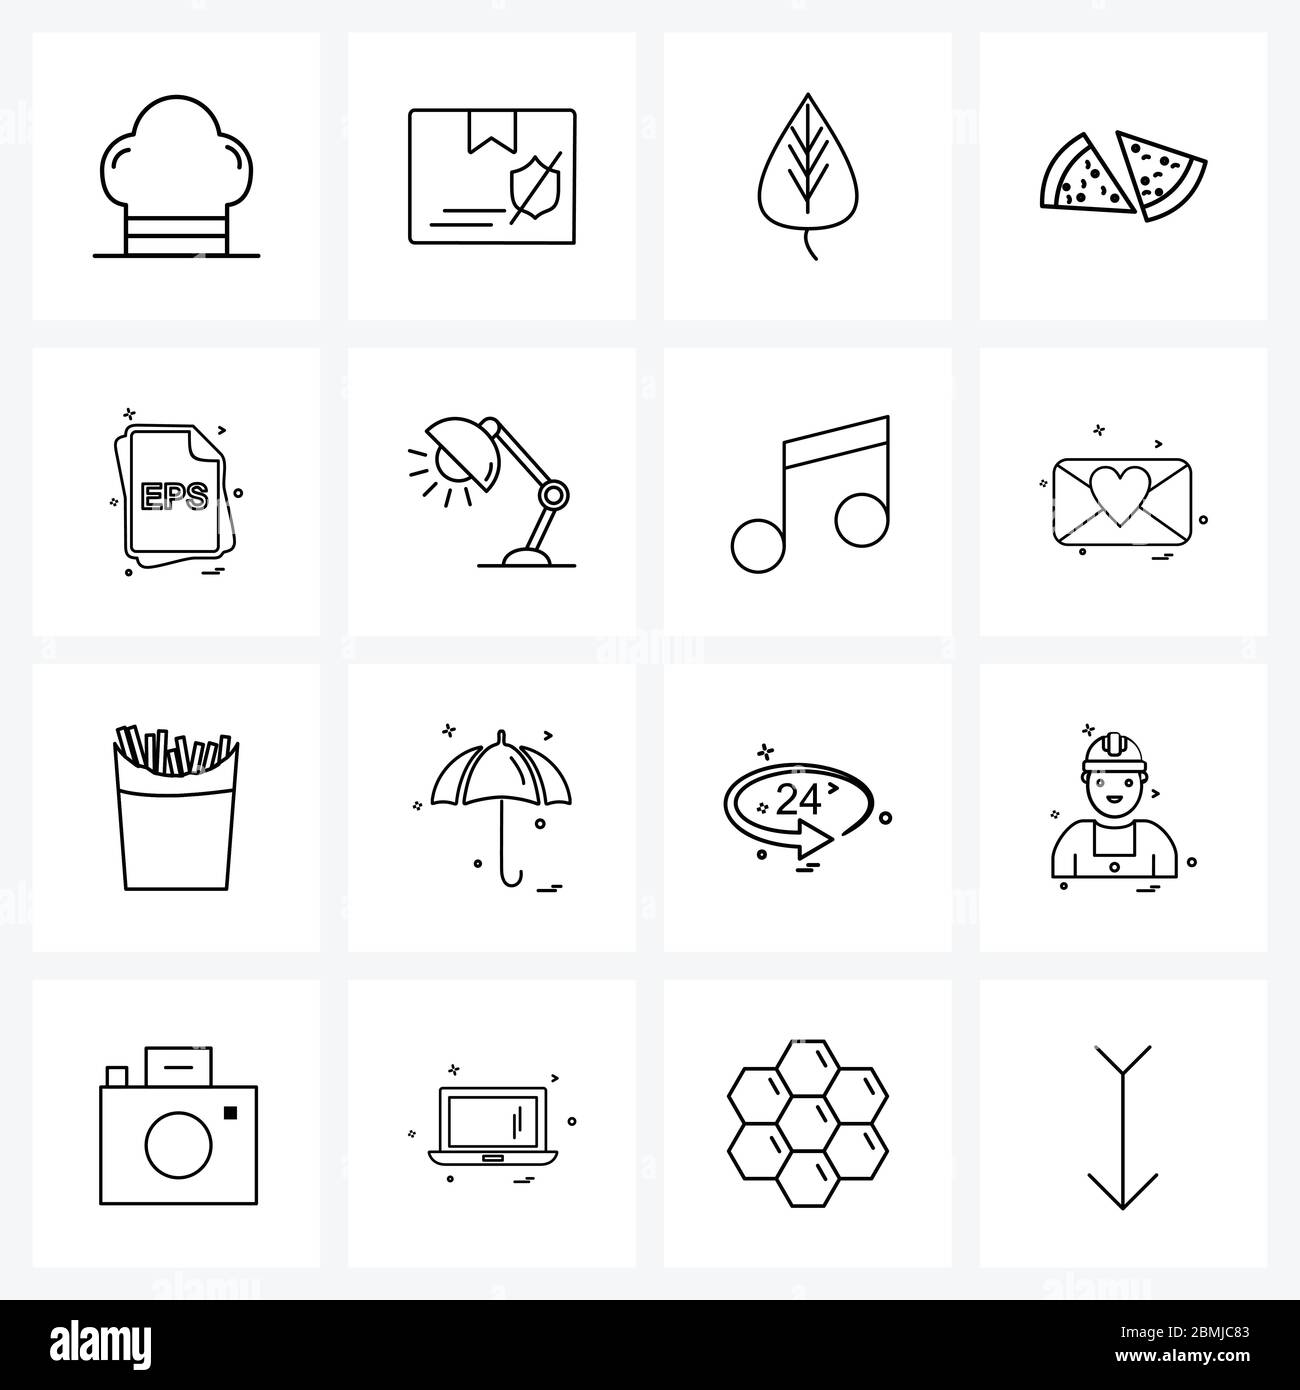 Isolated Symbols Set of 16 Simple Line Icons of esp., file type, nature, file type, eat Vector Illustration Stock Vector